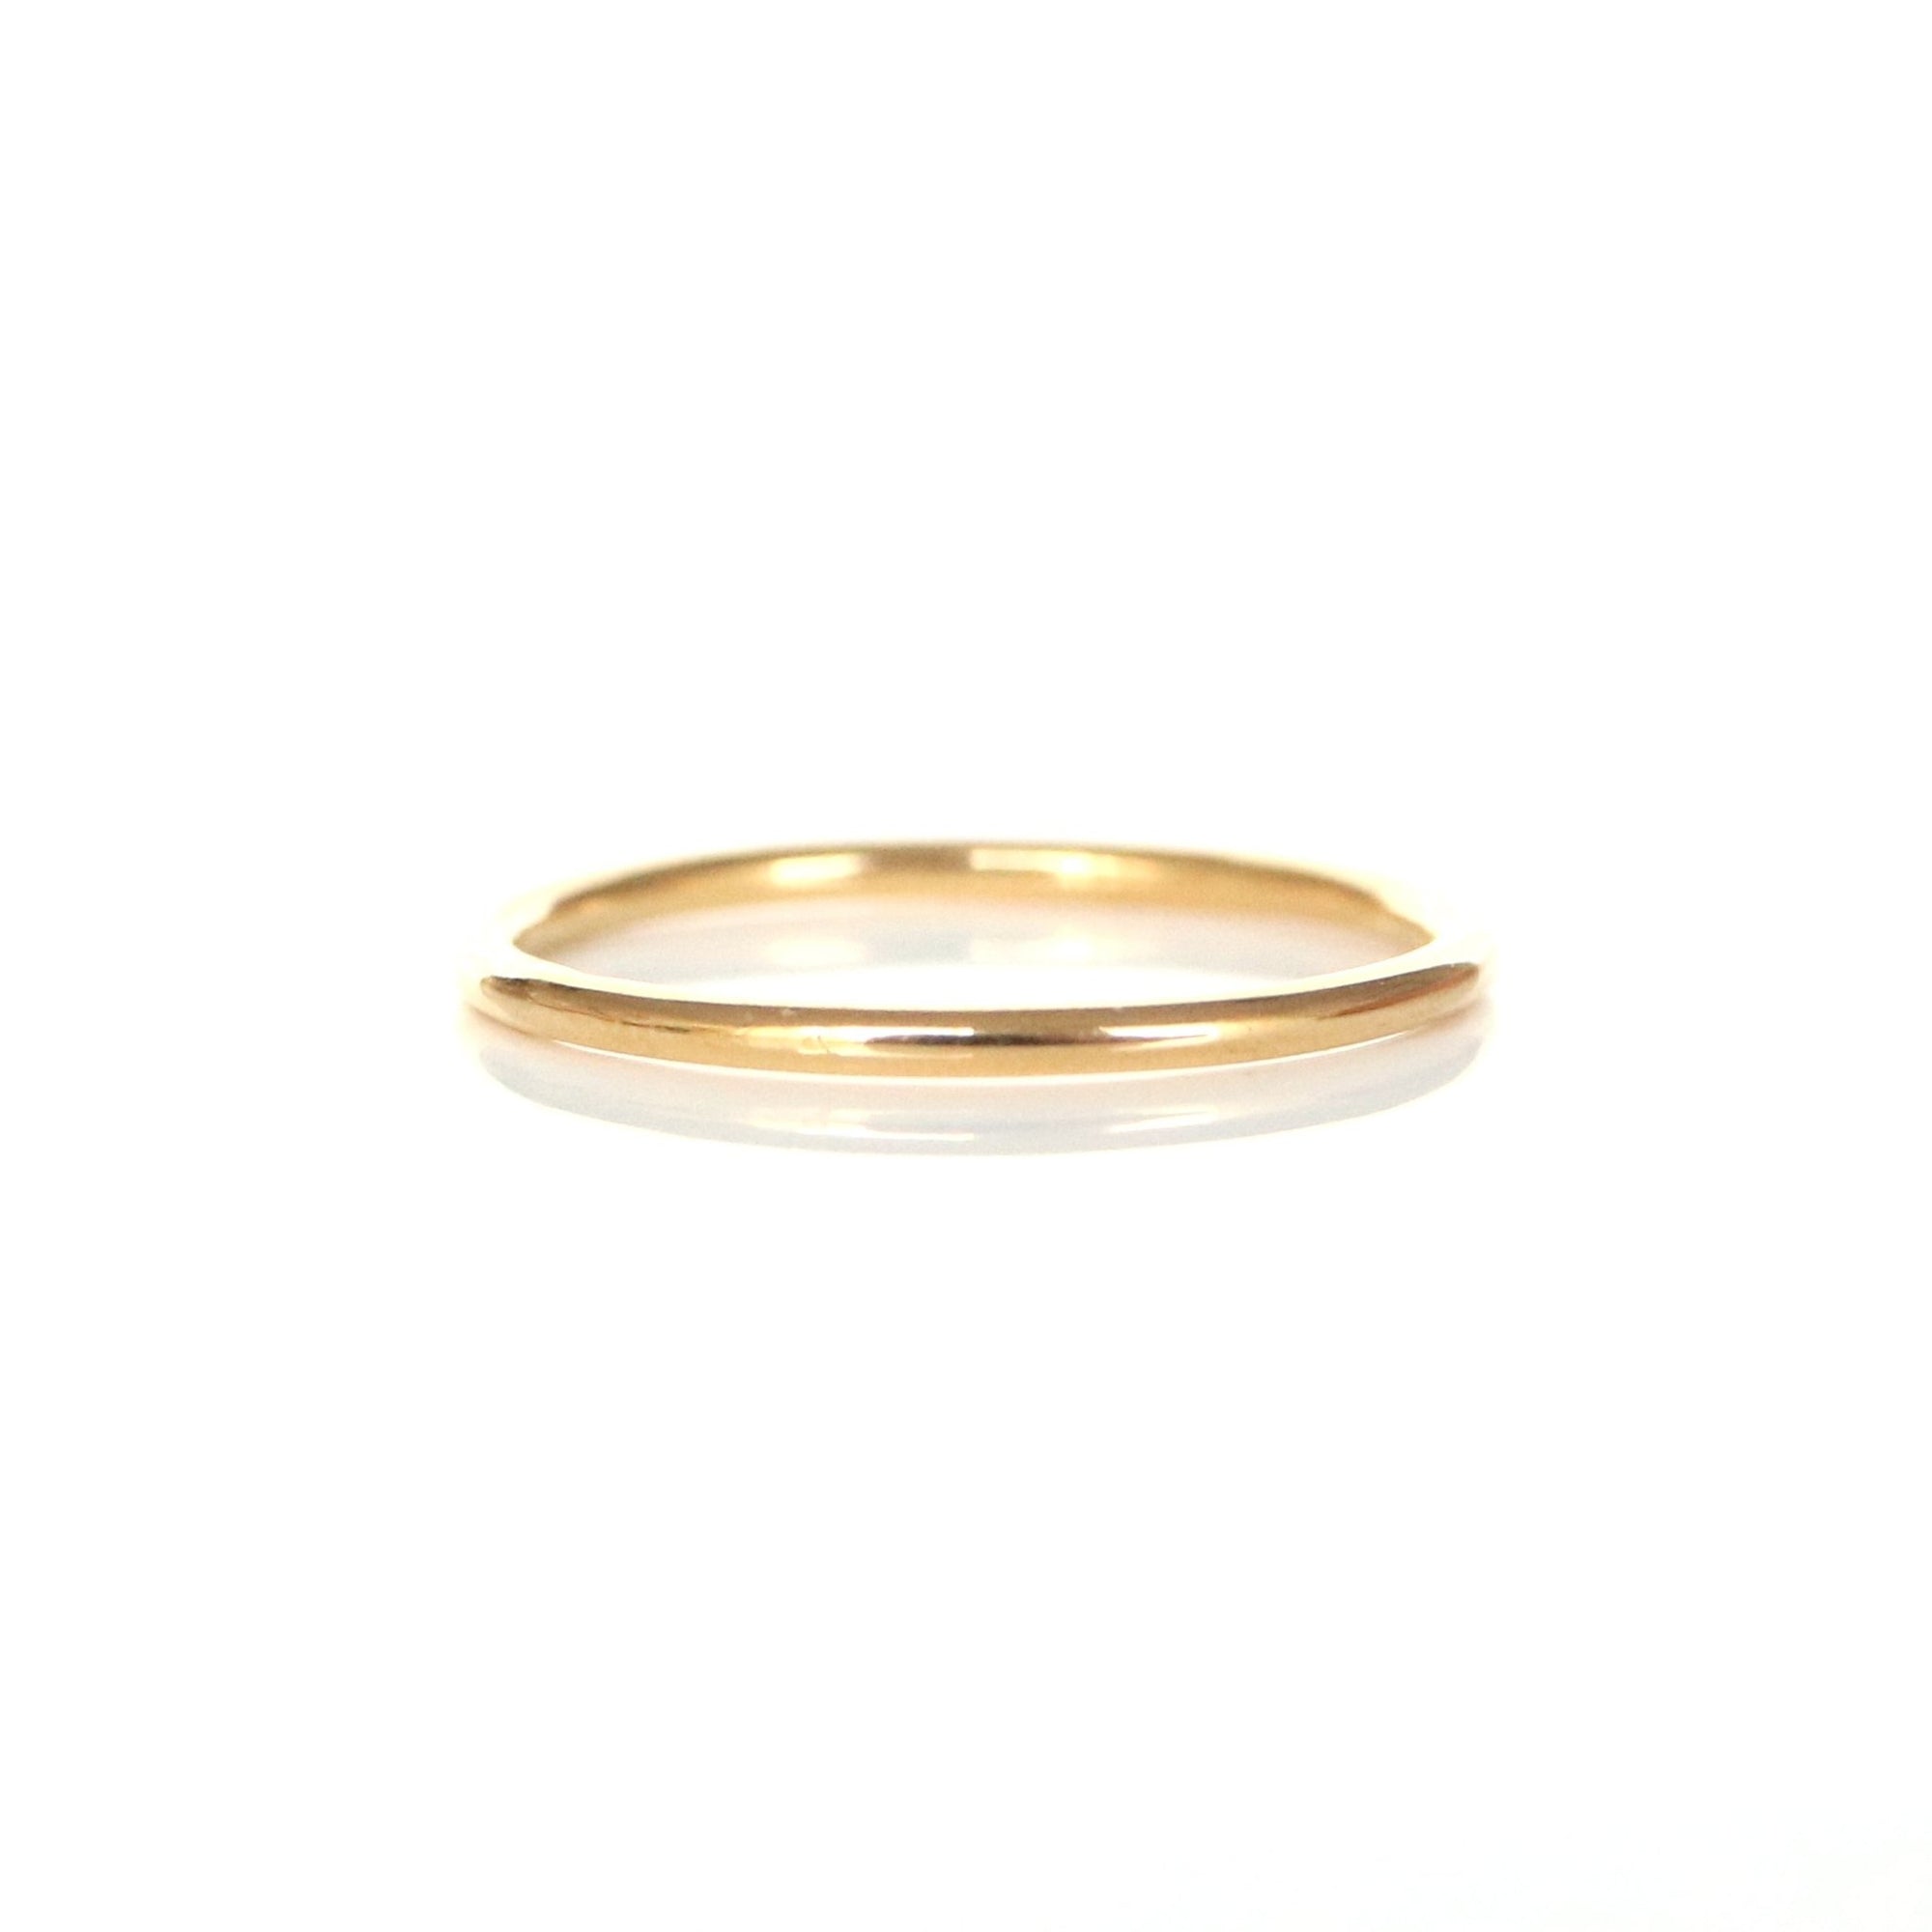 POISE THIN BAND RING - GOLD - SO PRETTY CARA COTTER